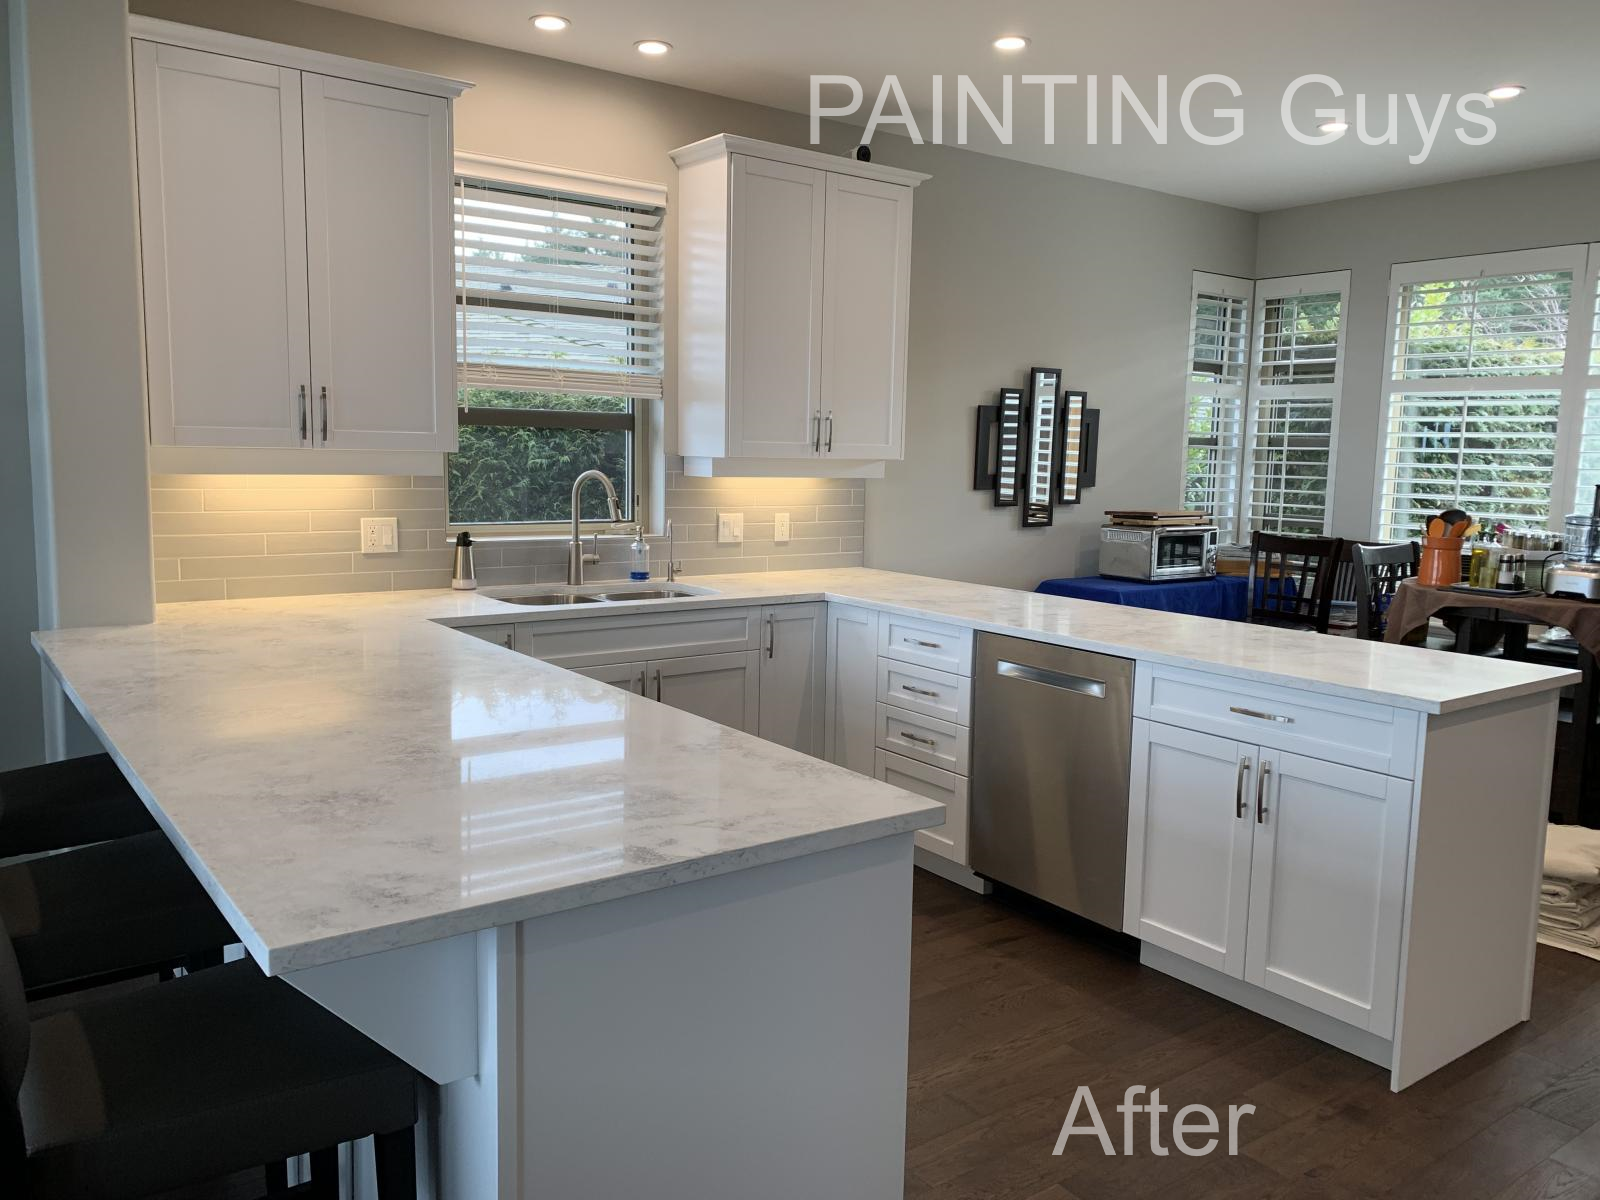 Kitchen cabinet painting after painting